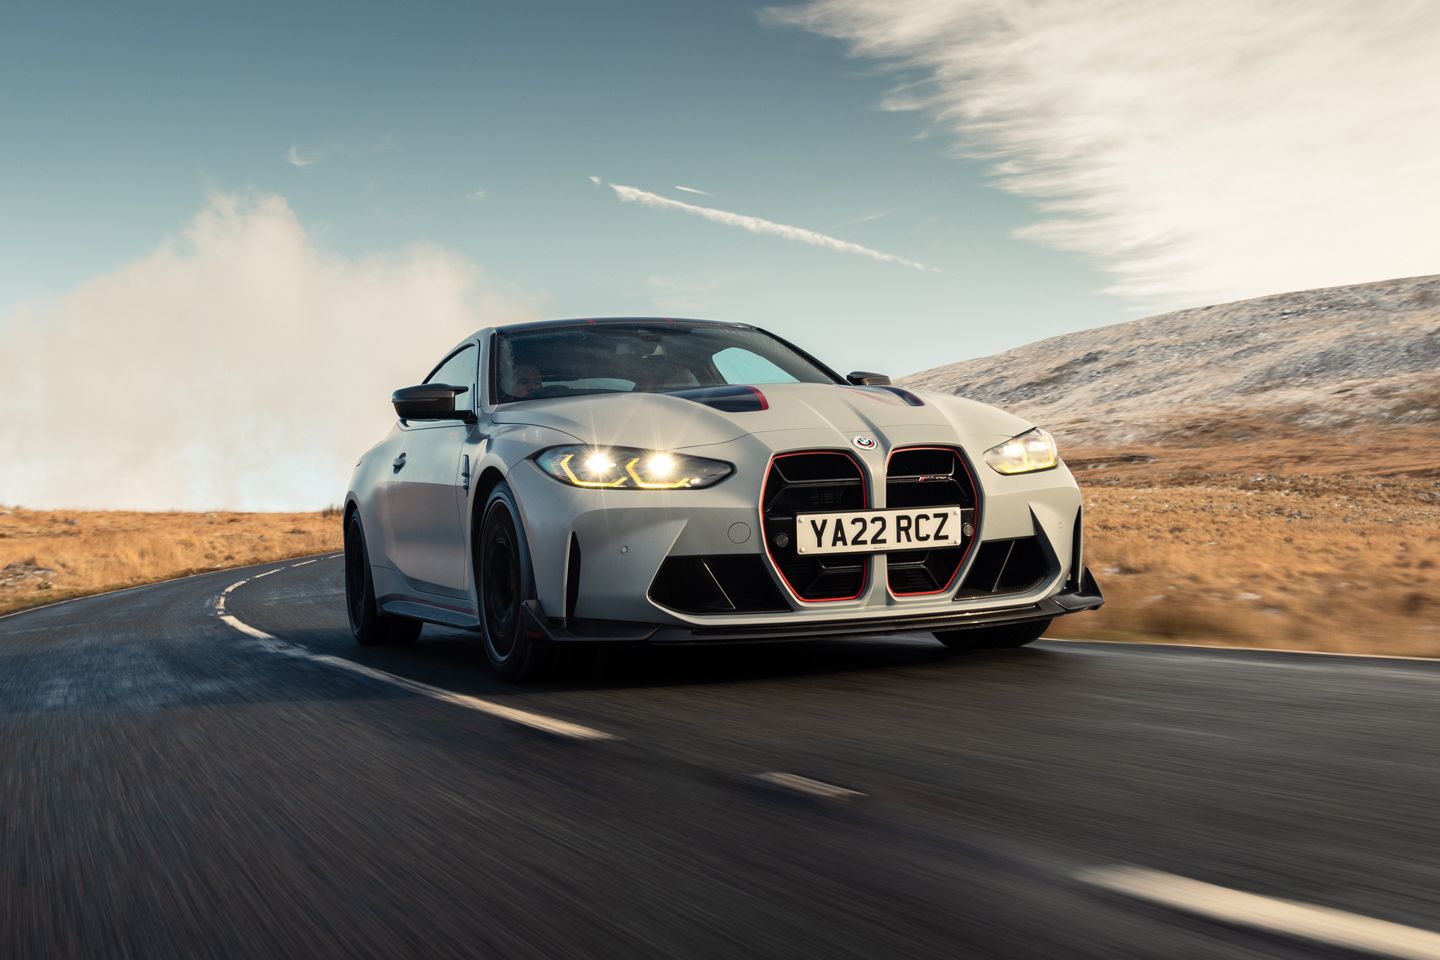 New CS inbound in the wake of record BMW M sales - PistonHeads UK